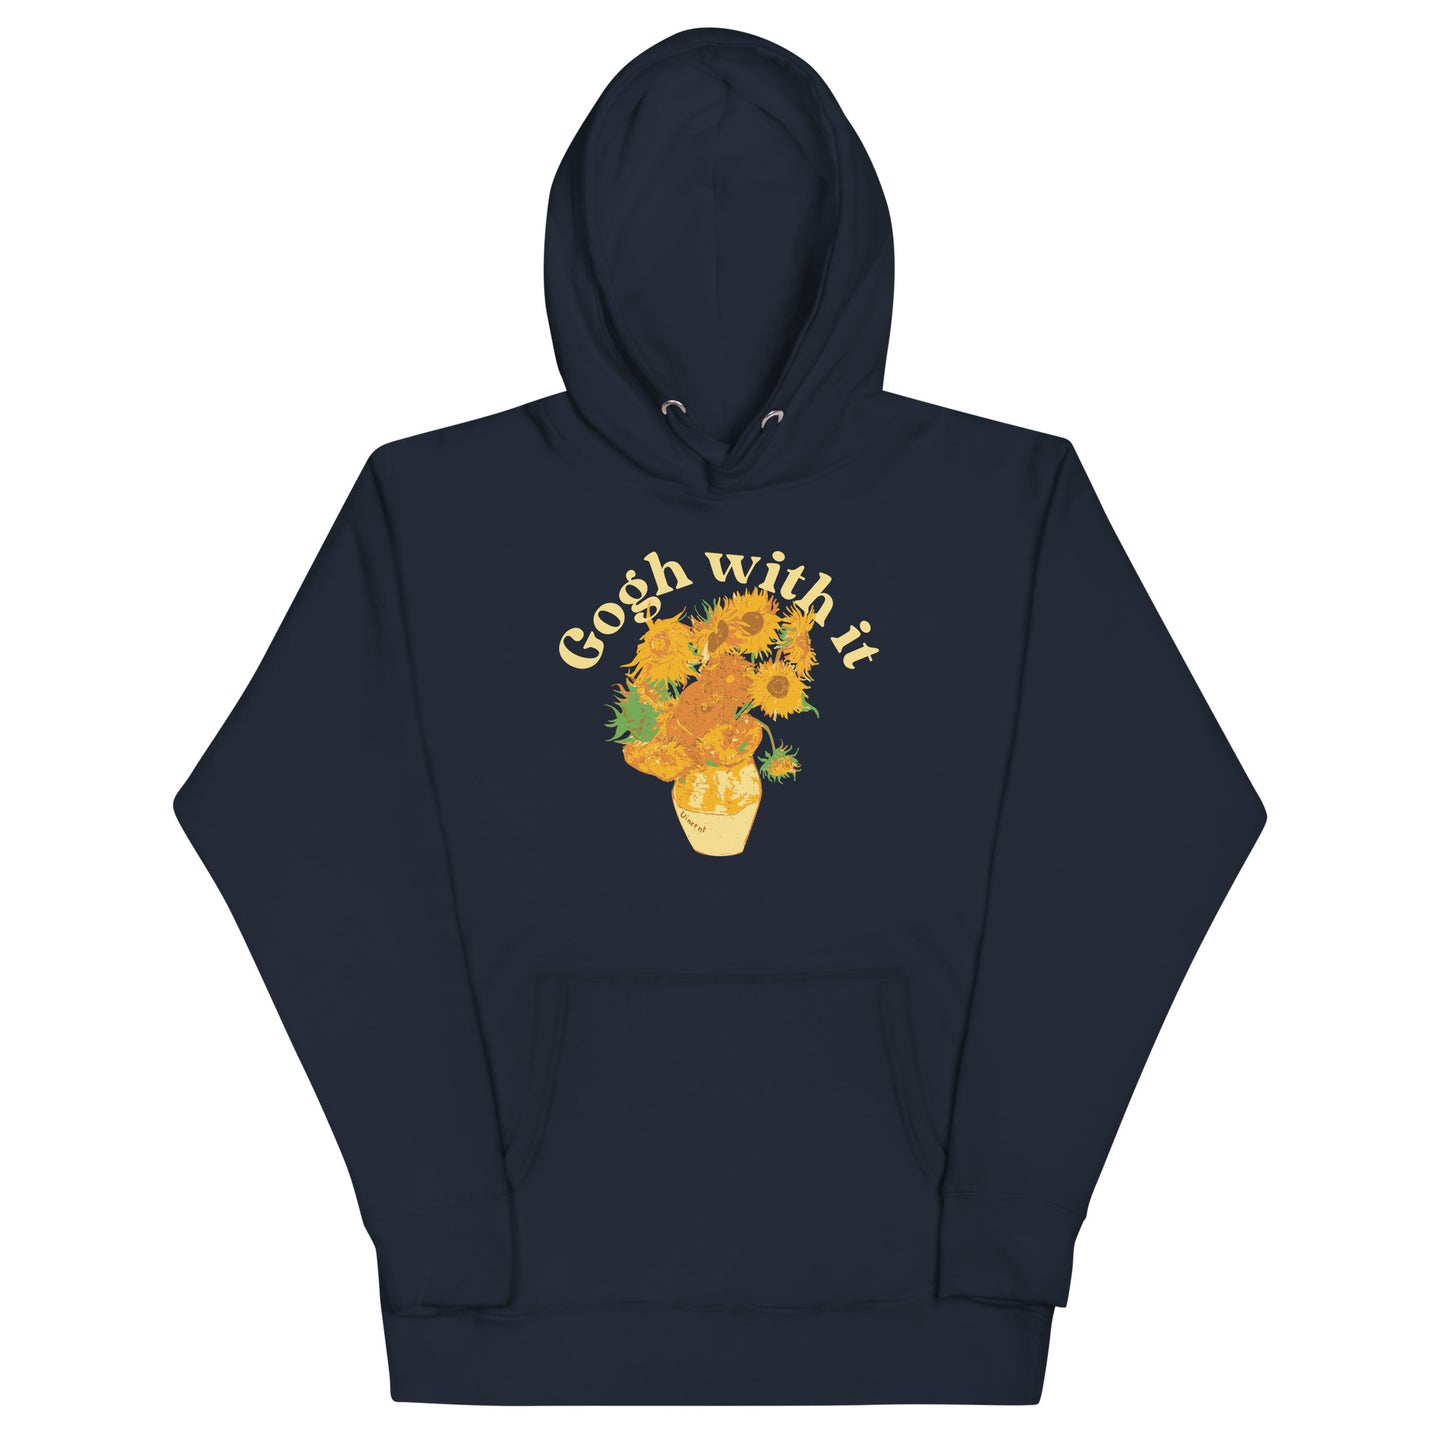 Gogh With It Unisex Hoodie